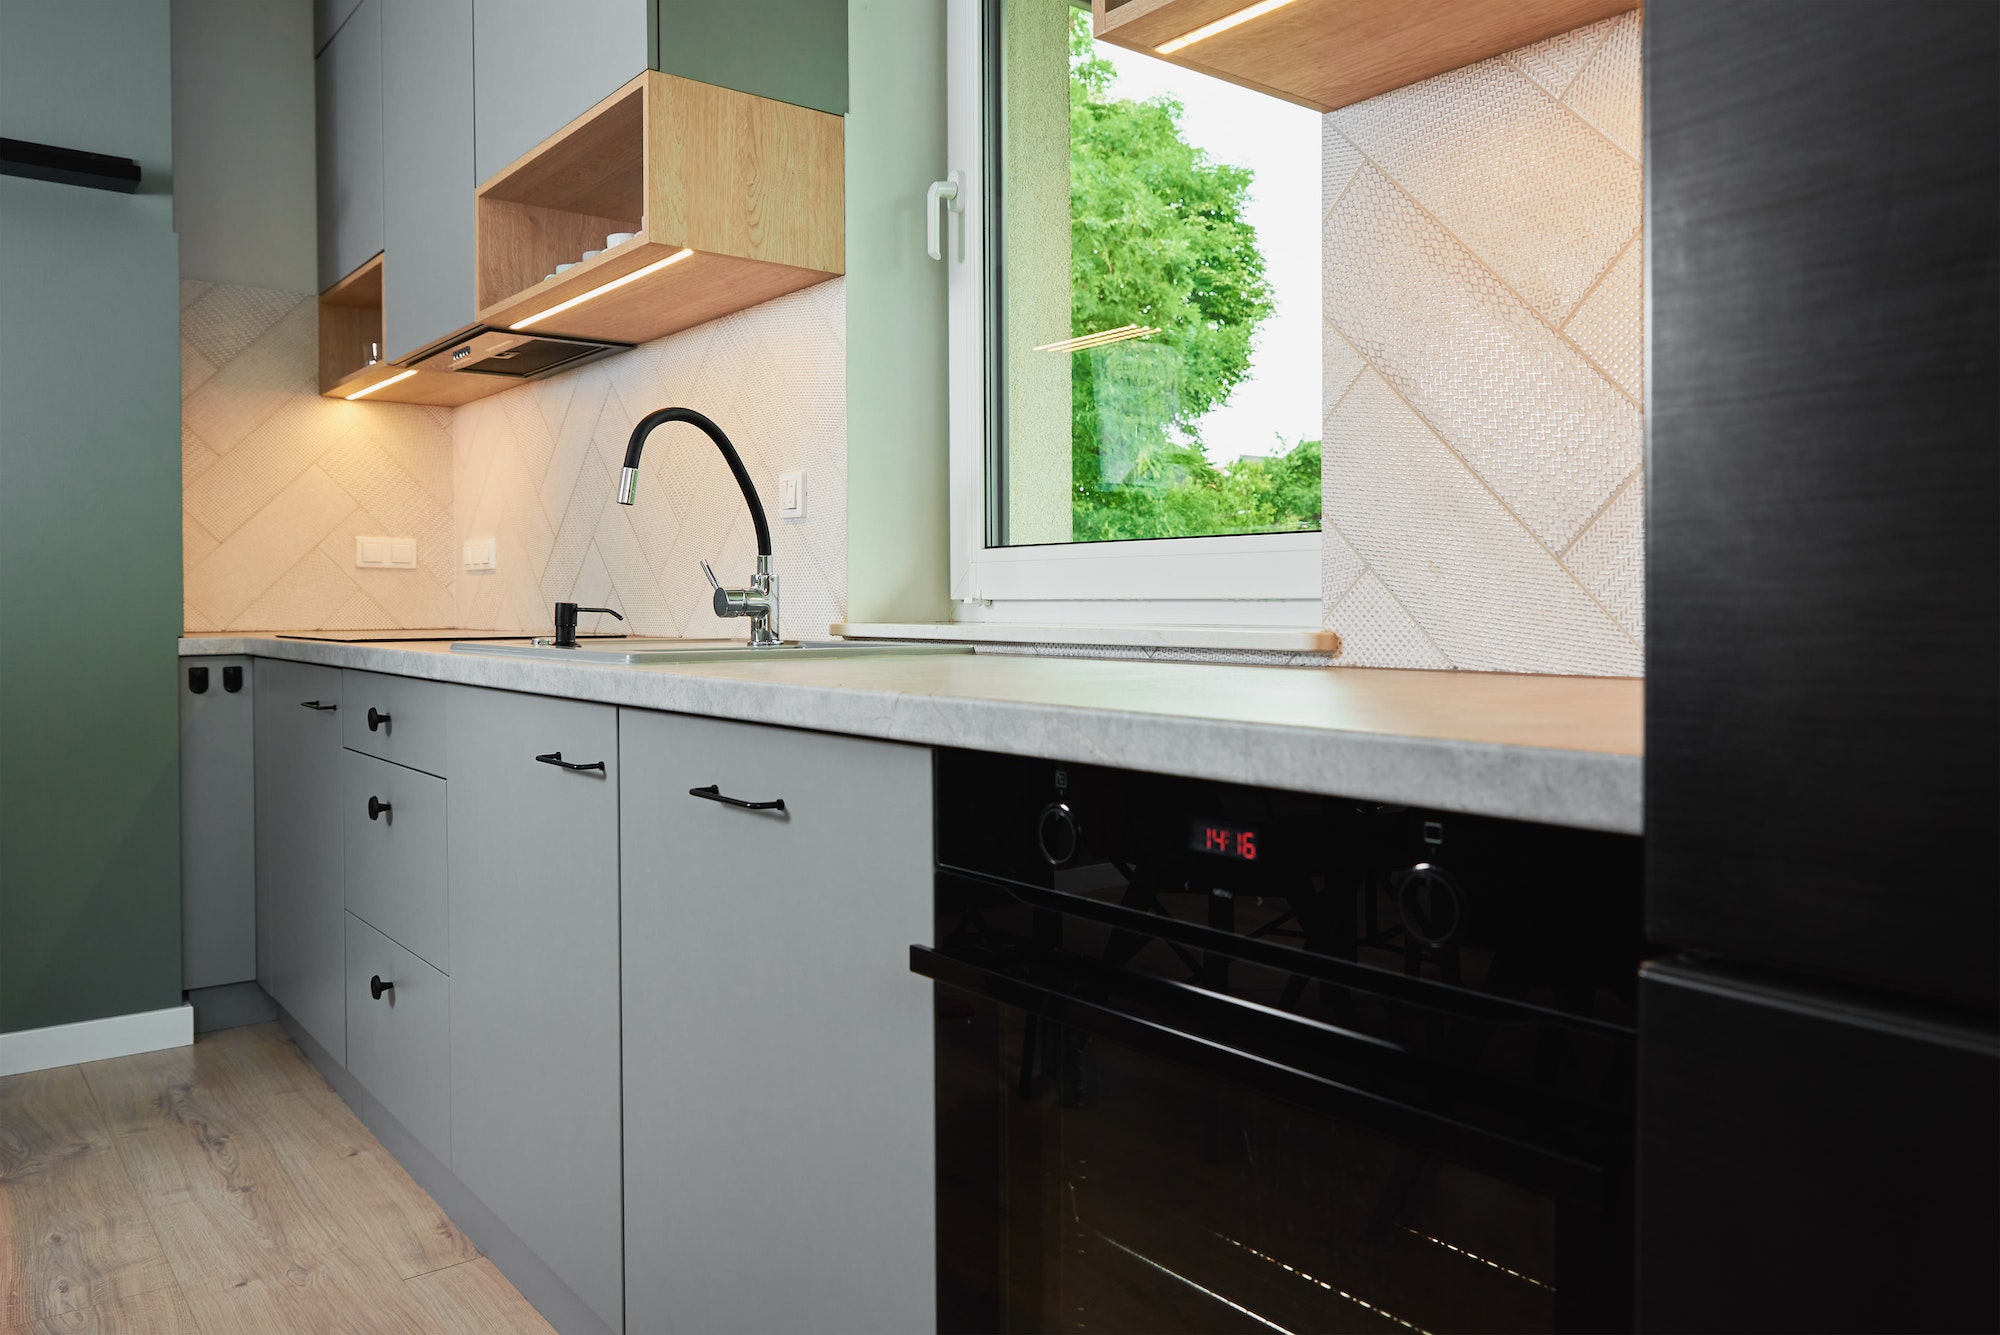 When it comes to choosing new countertops, two of the most popular options are granite and quartz. Both natural stone materials are prized for their elegant beauty and renowned durability.